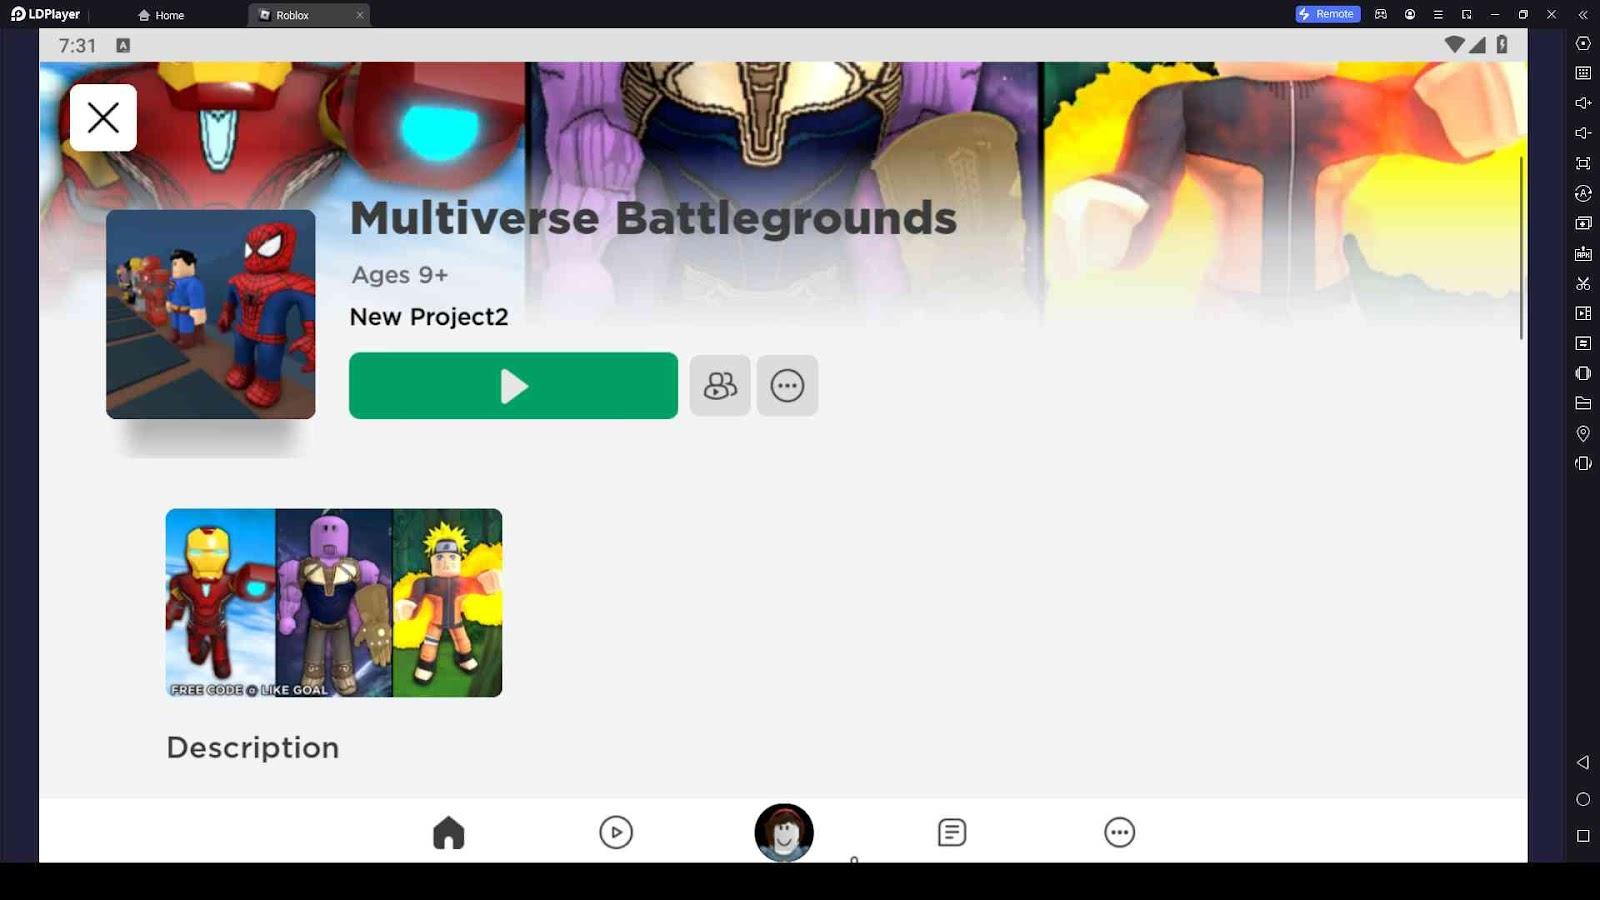 Step-by-Step Guide: How to Redeem Roblox Multiverse Battlegrounds